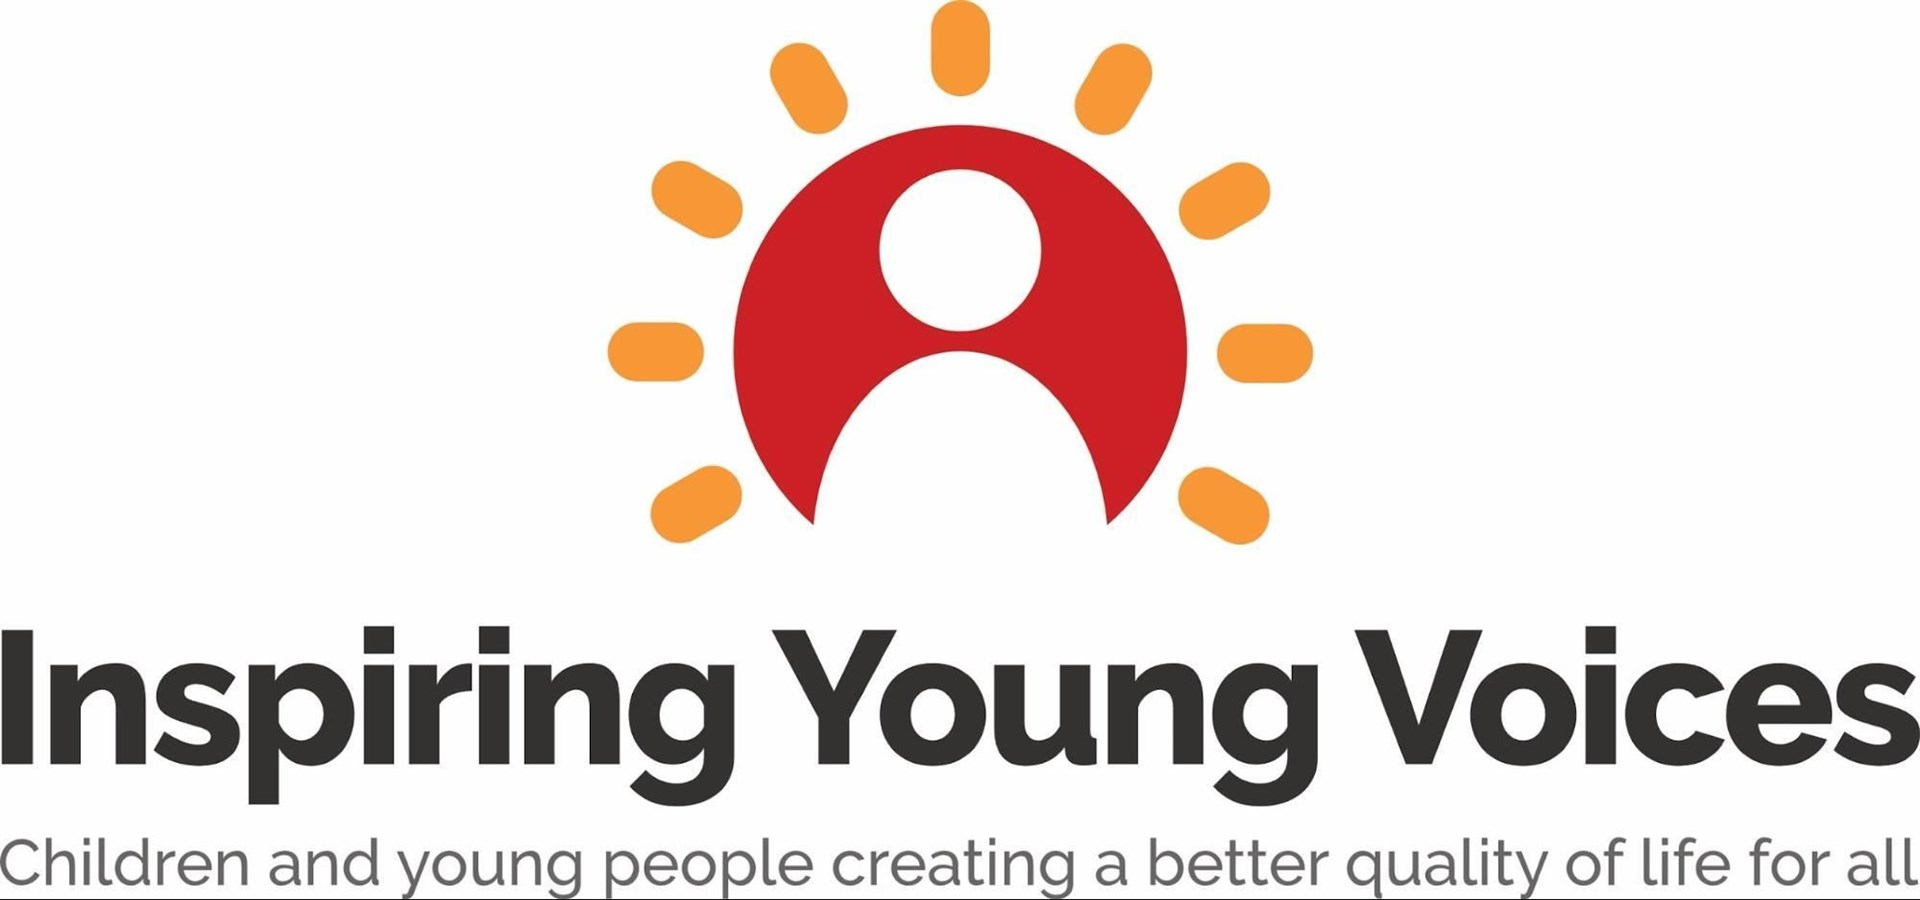 Inspiring Young Voices charity logo.